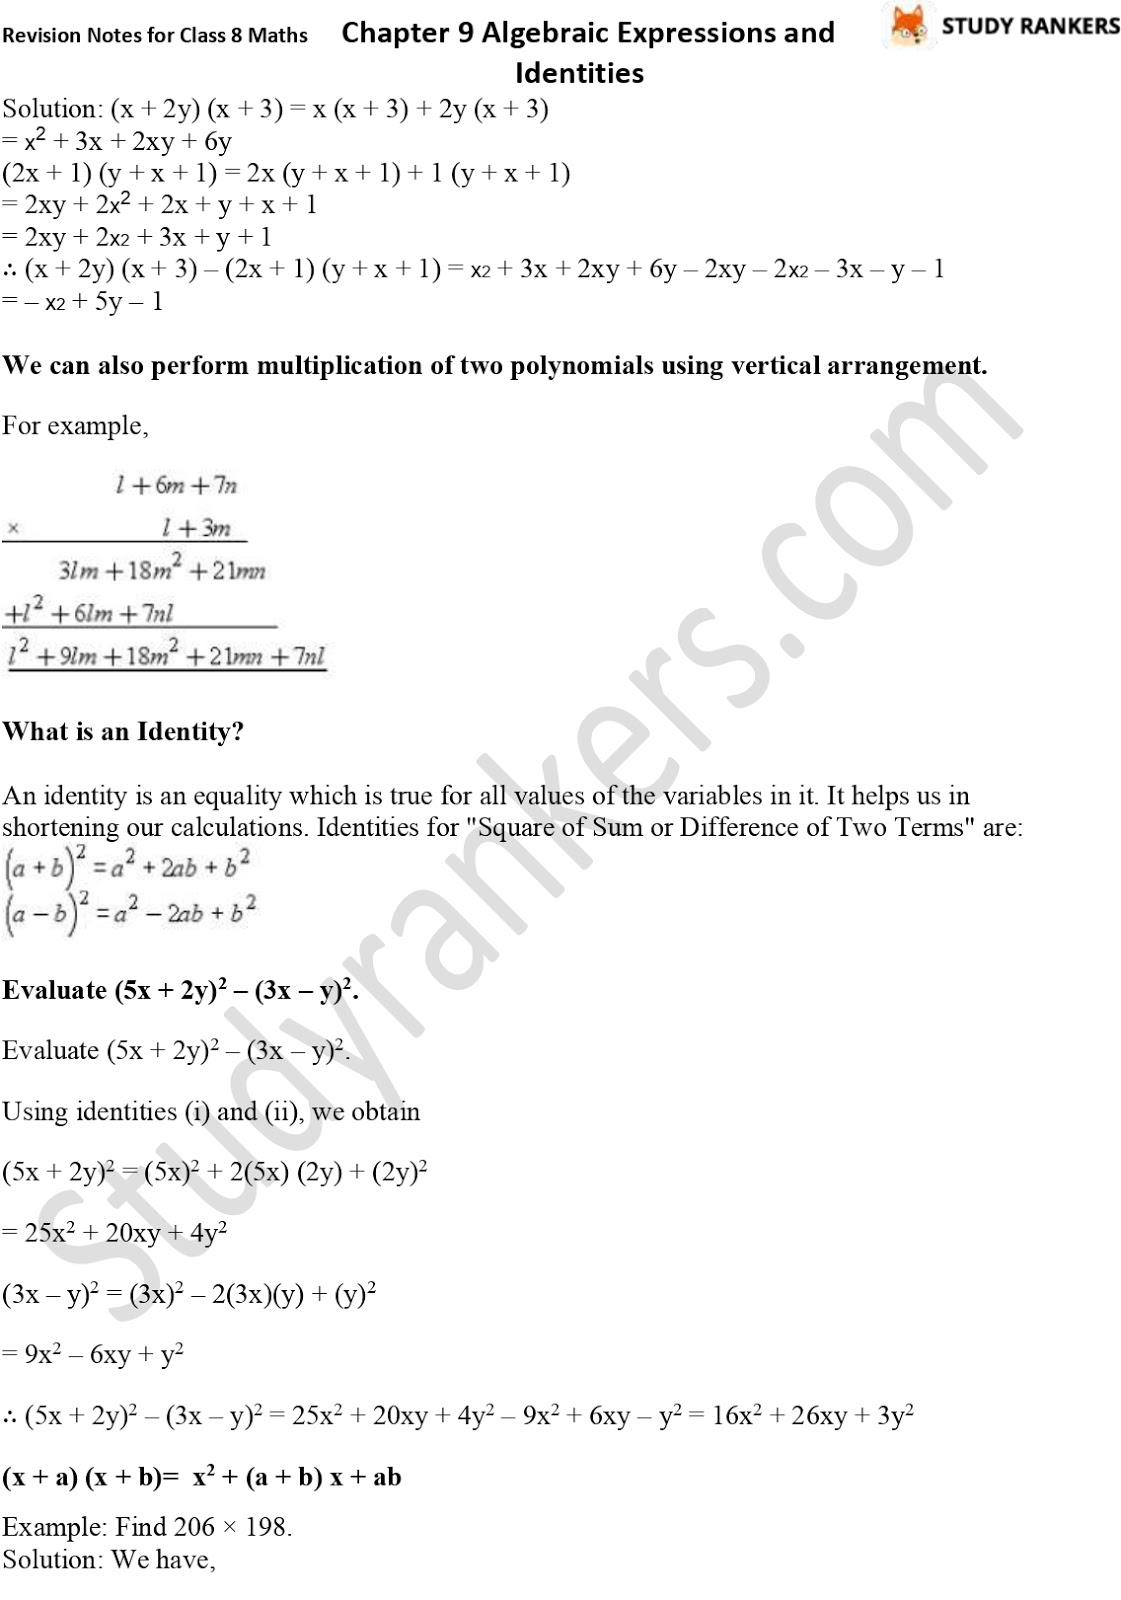 CBSE Revision Notes for Class 8 Chapter 9 Algebraic Expressions and Identities Part 3